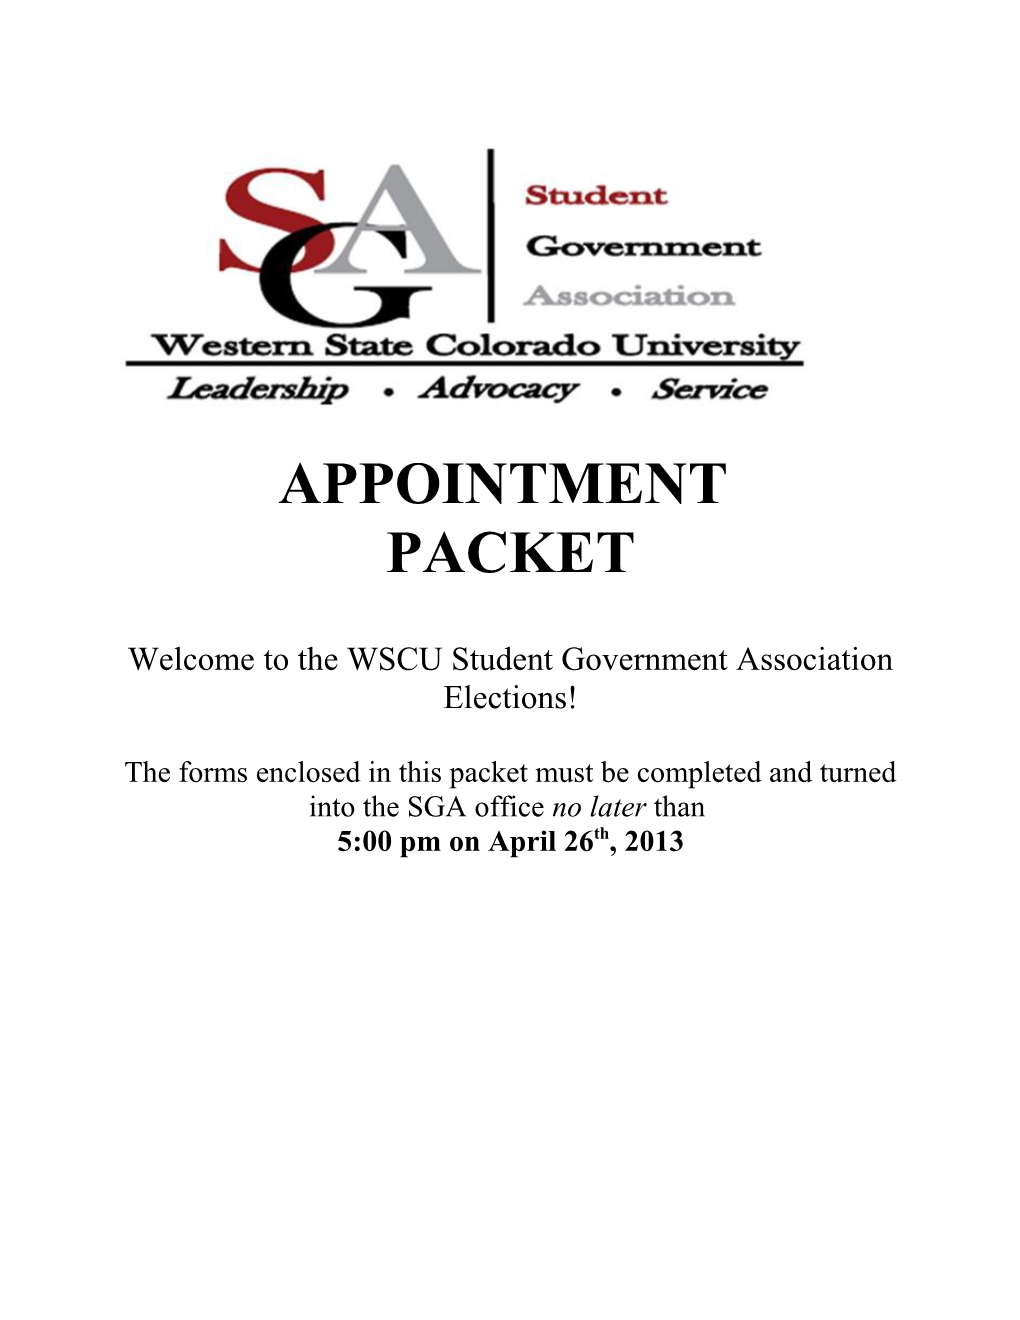 Welcome to the WSCU Student Government Association Elections!